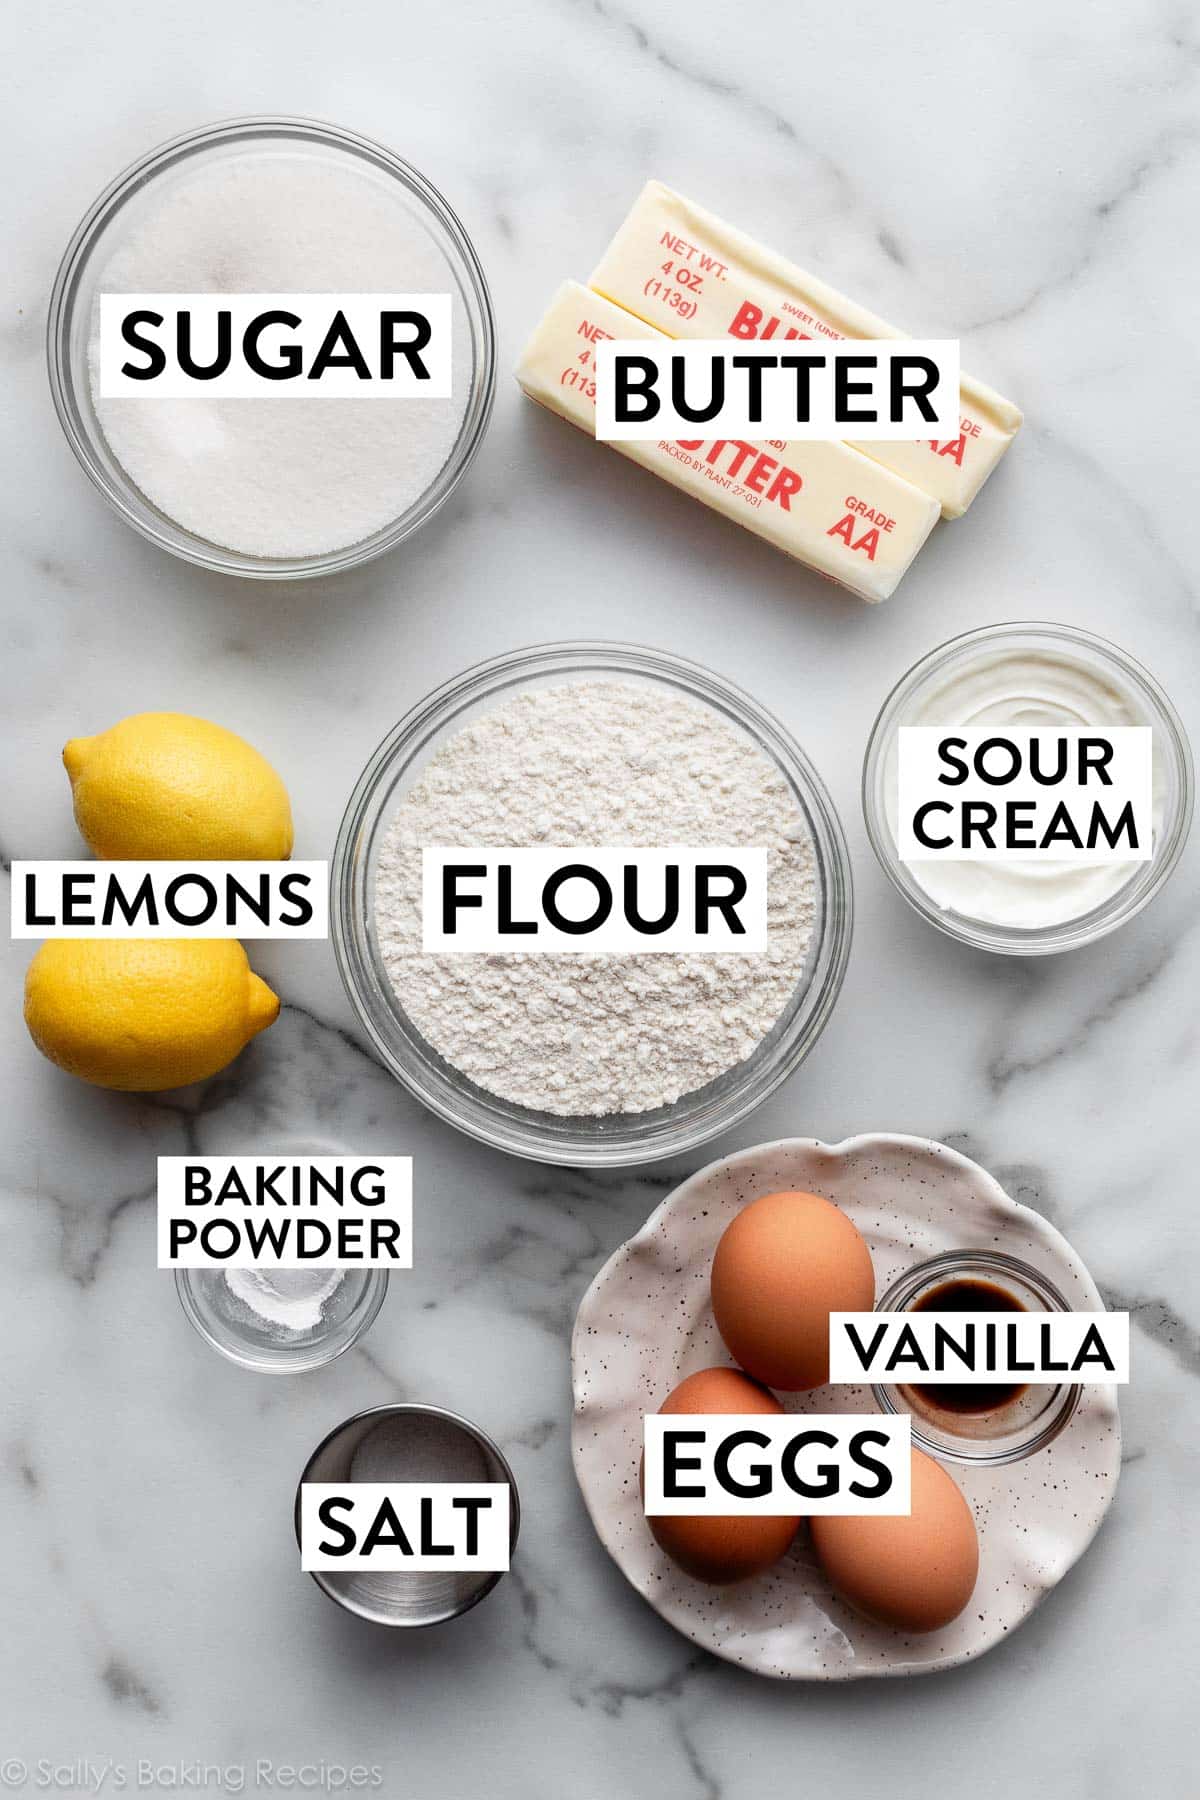 ingredients on marble counter including flour, butter, sour cream, eggs, vanilla, salt, and sugar.